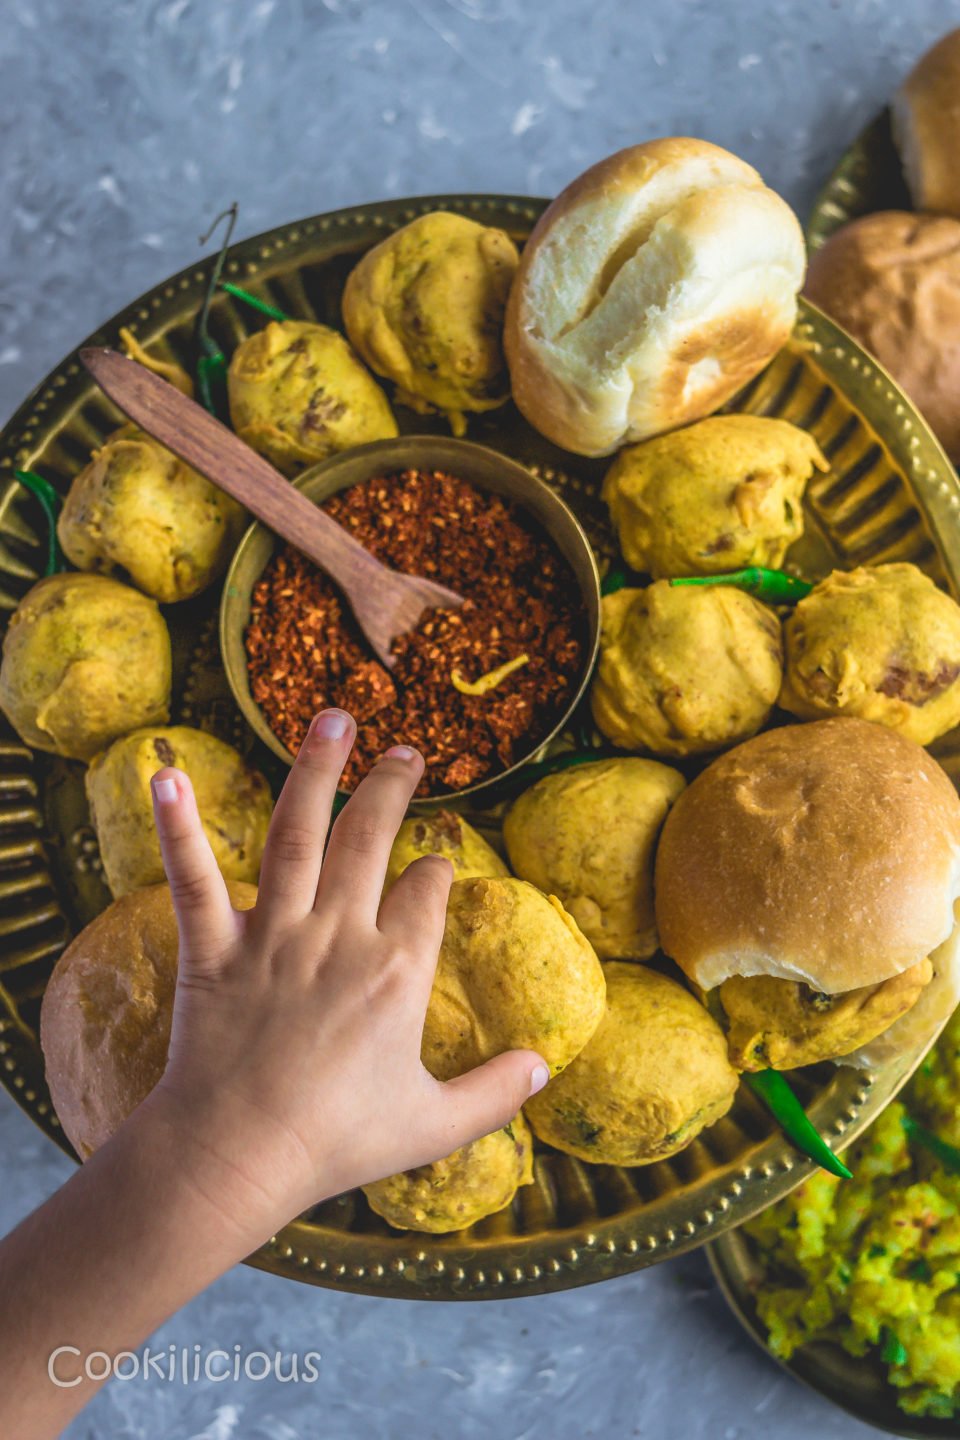 a child's hand reaching out to pick up a vada pav from a plate